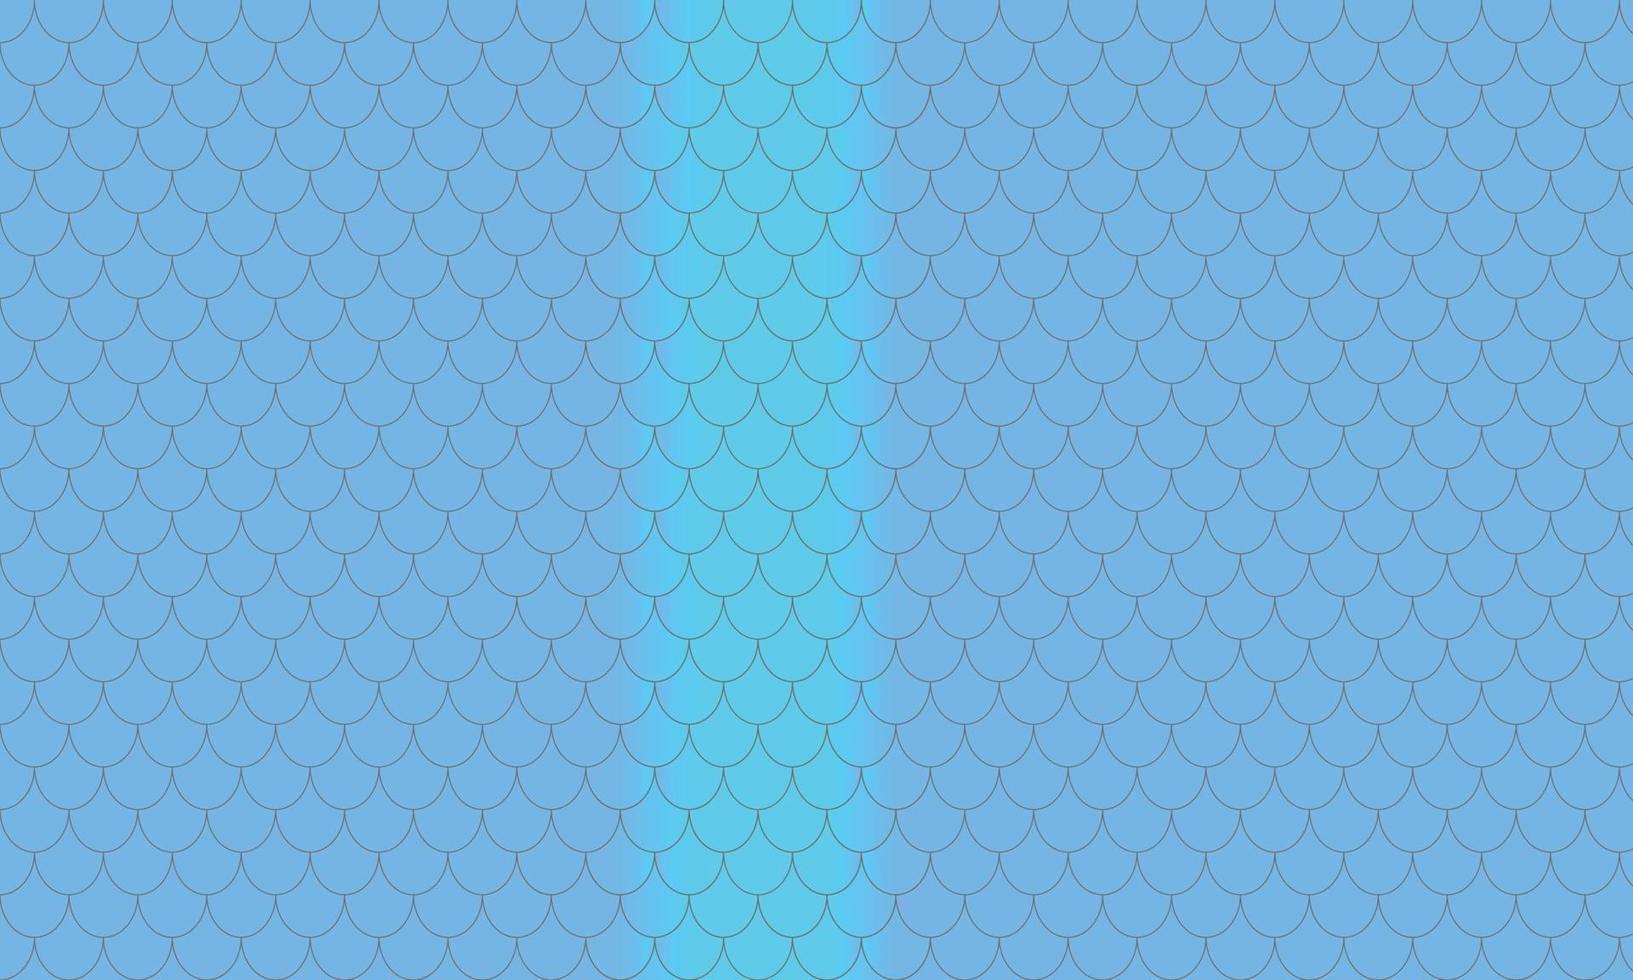 blue fish scales background free vector